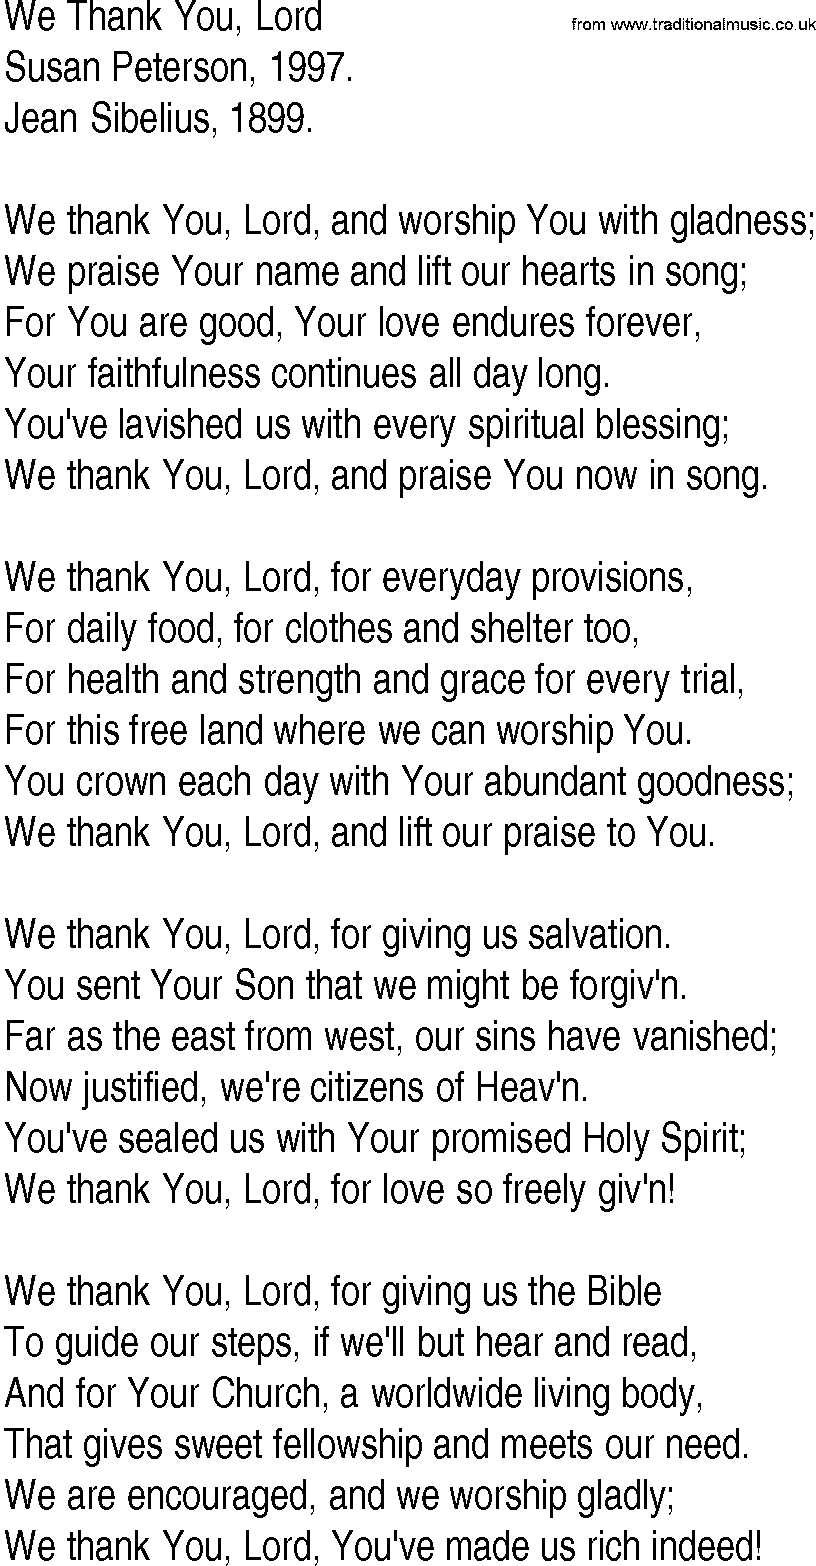 Hymn And Gospel Song Lyrics For We Thank You Lord By Susan Peterson